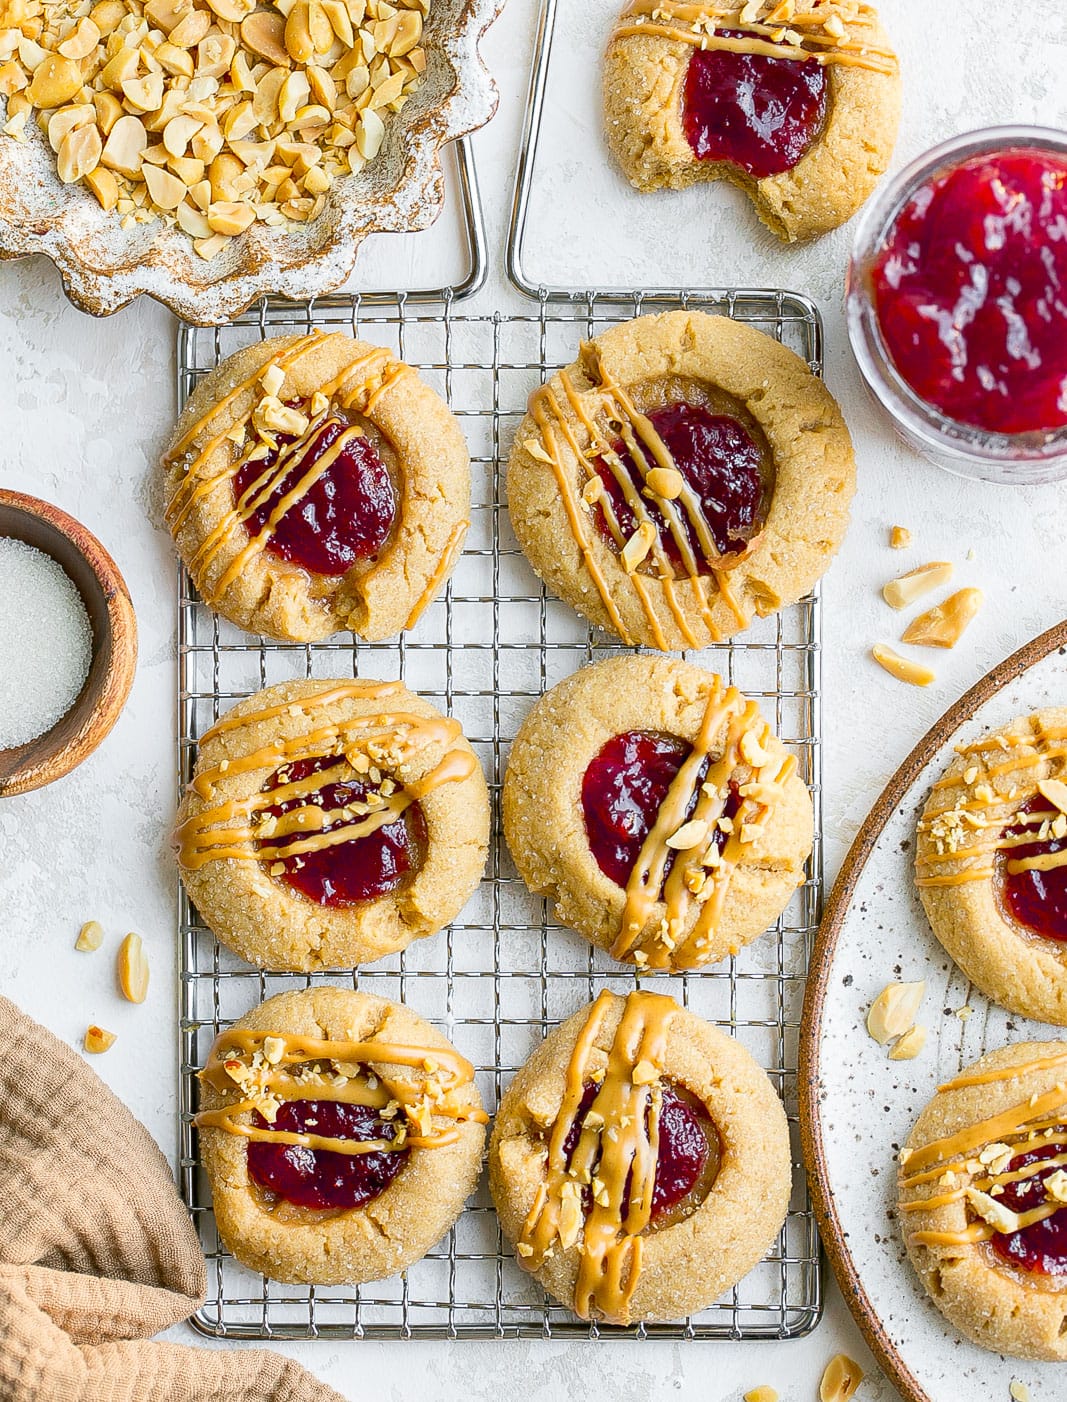 Peanut butter cookies on a cooling rack with jelly.